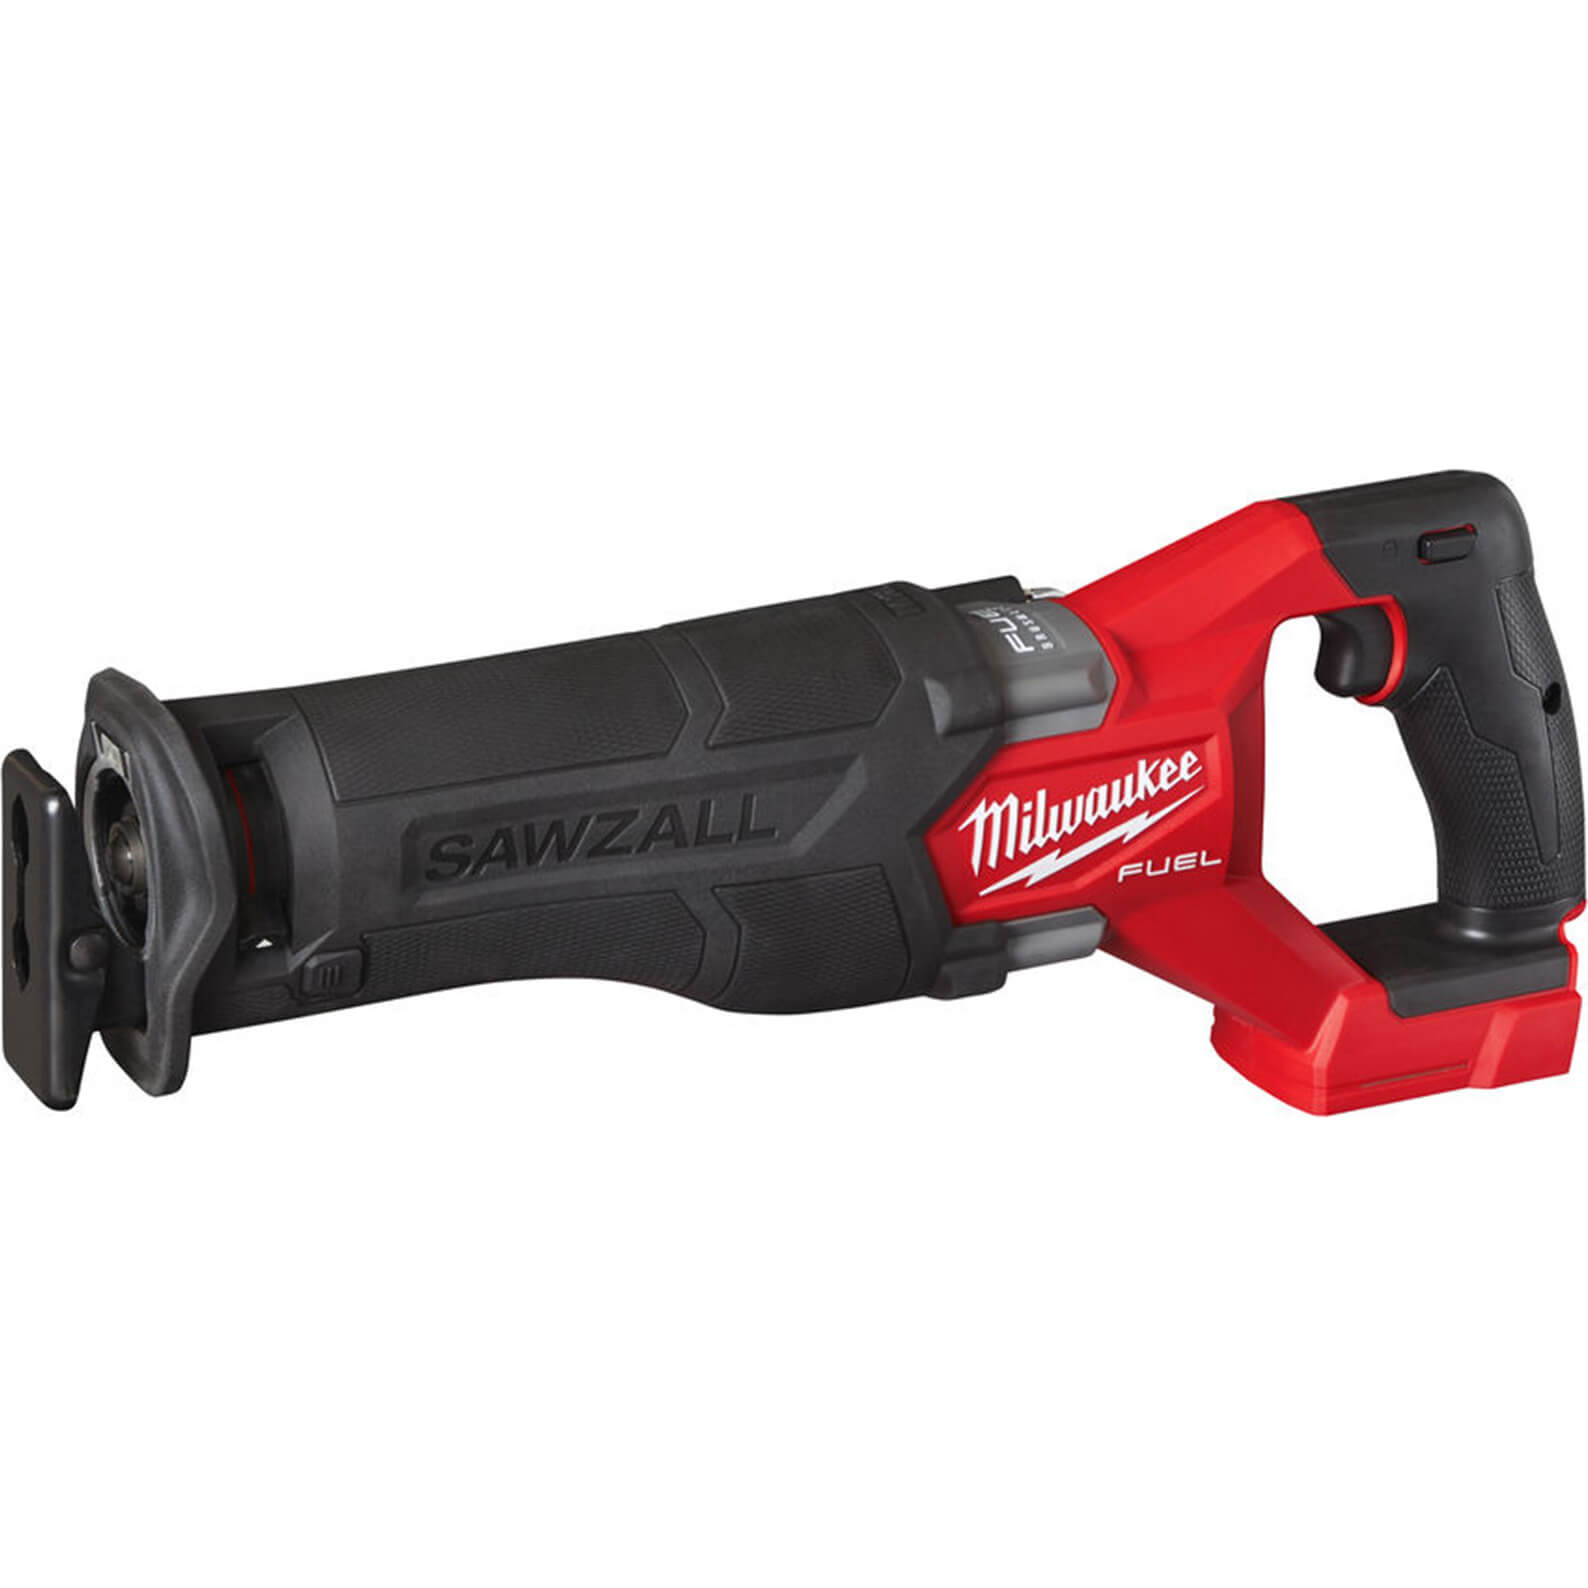 Image of Milwaukee M18 FSZ Fuel 18v Cordless Brushless Sawzall Reciprocating Saw No Batteries No Charger No Case